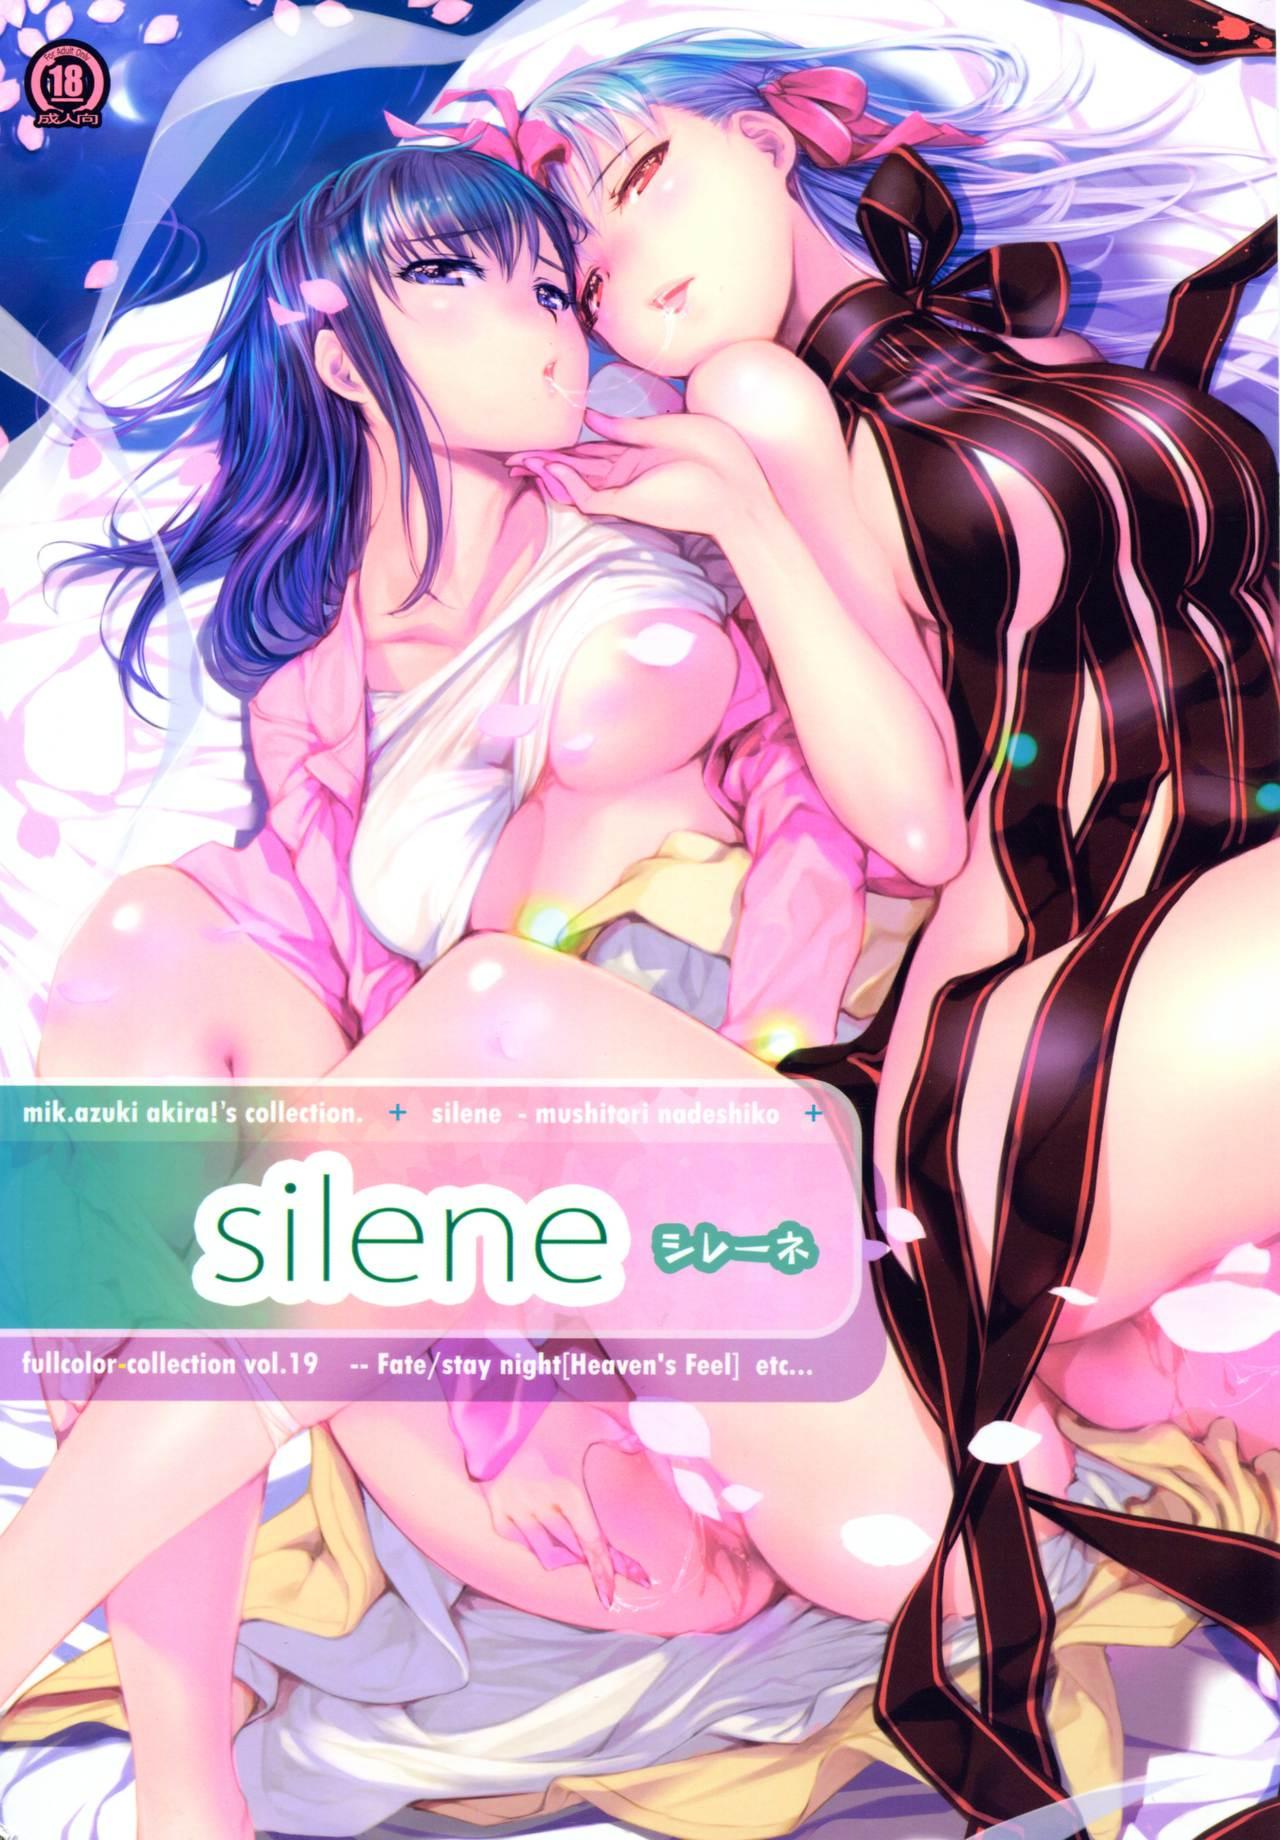 Real silene - Fate stay night Best Blowjob Ever - Picture 1